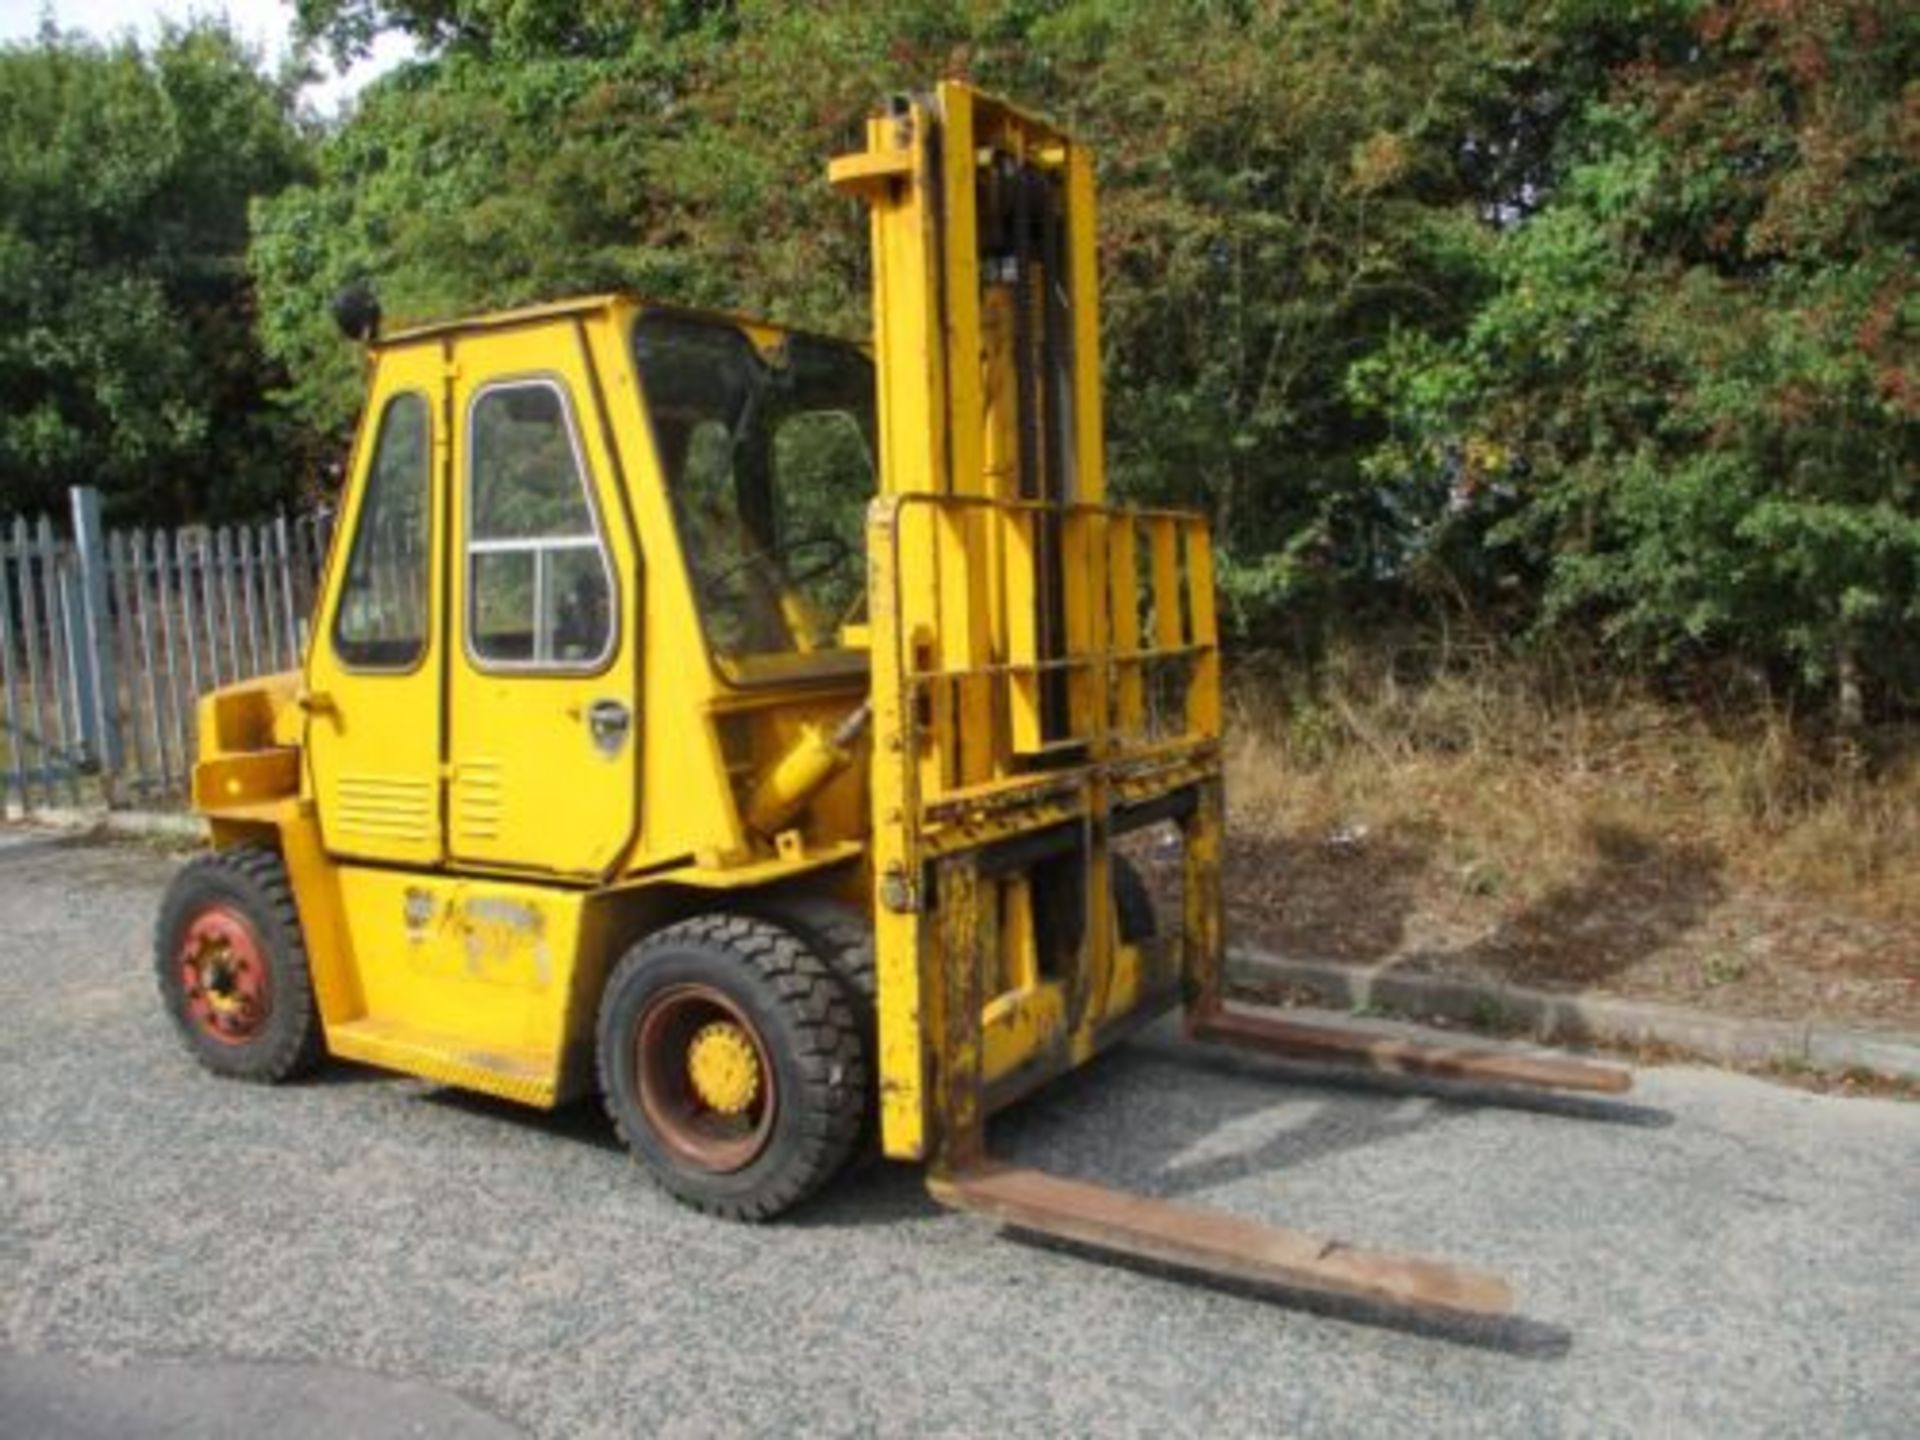 CLIMAX DA50 FORK LIFT FORKLIFT TRUCK STACKER 5 TON LIFT 6 7 8 10 DELIVERY - Image 8 of 12